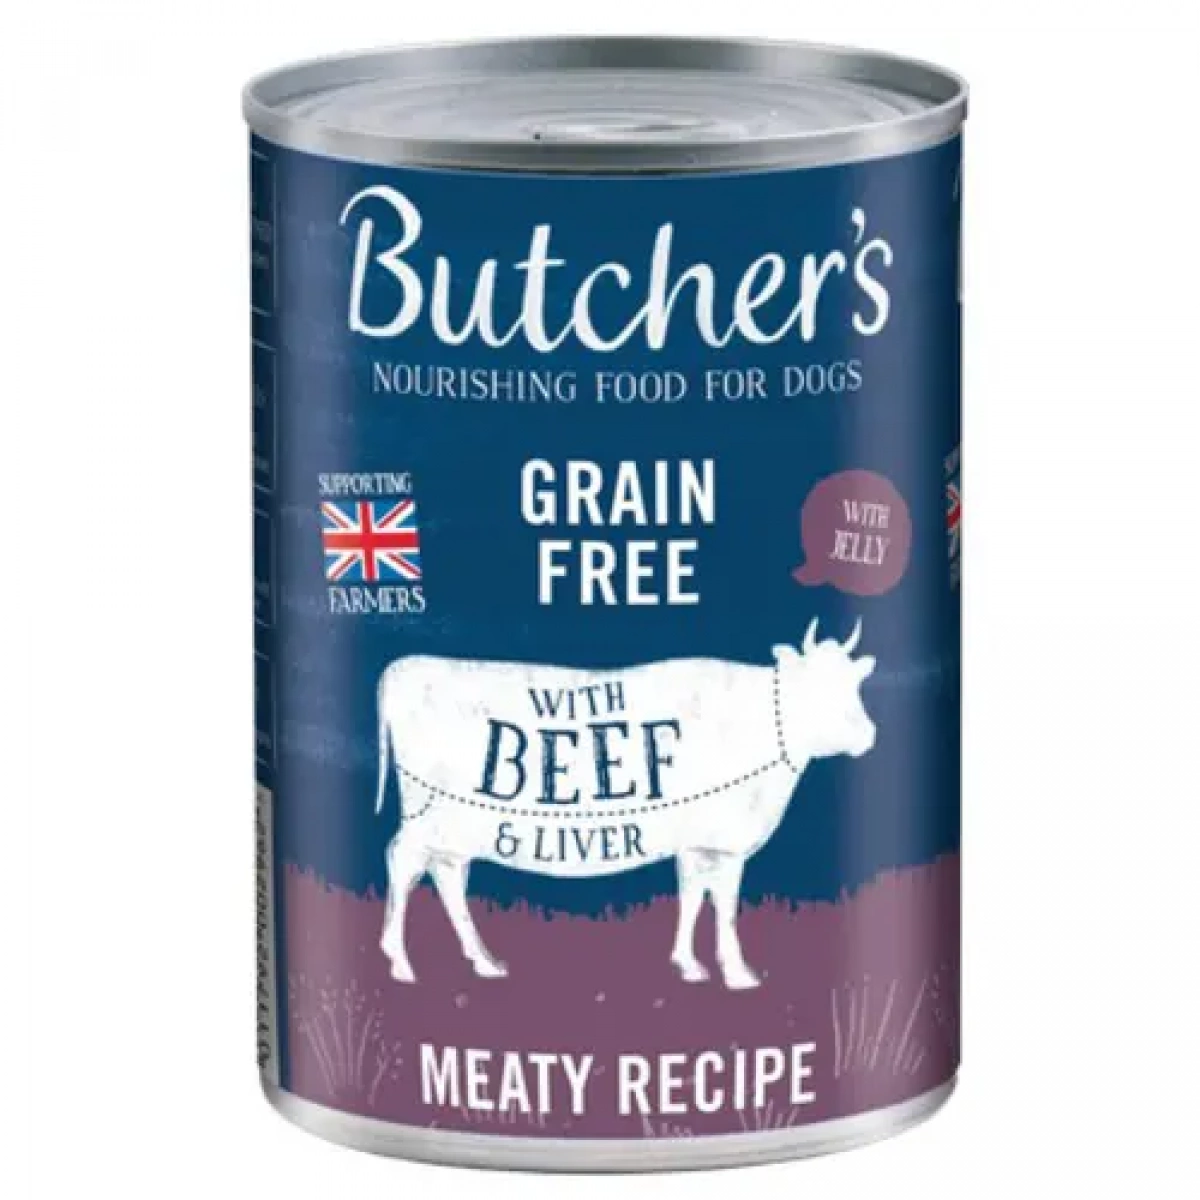 Butchers Meaty Recipe 400g – Pawfect Supplies Ltd Product Image